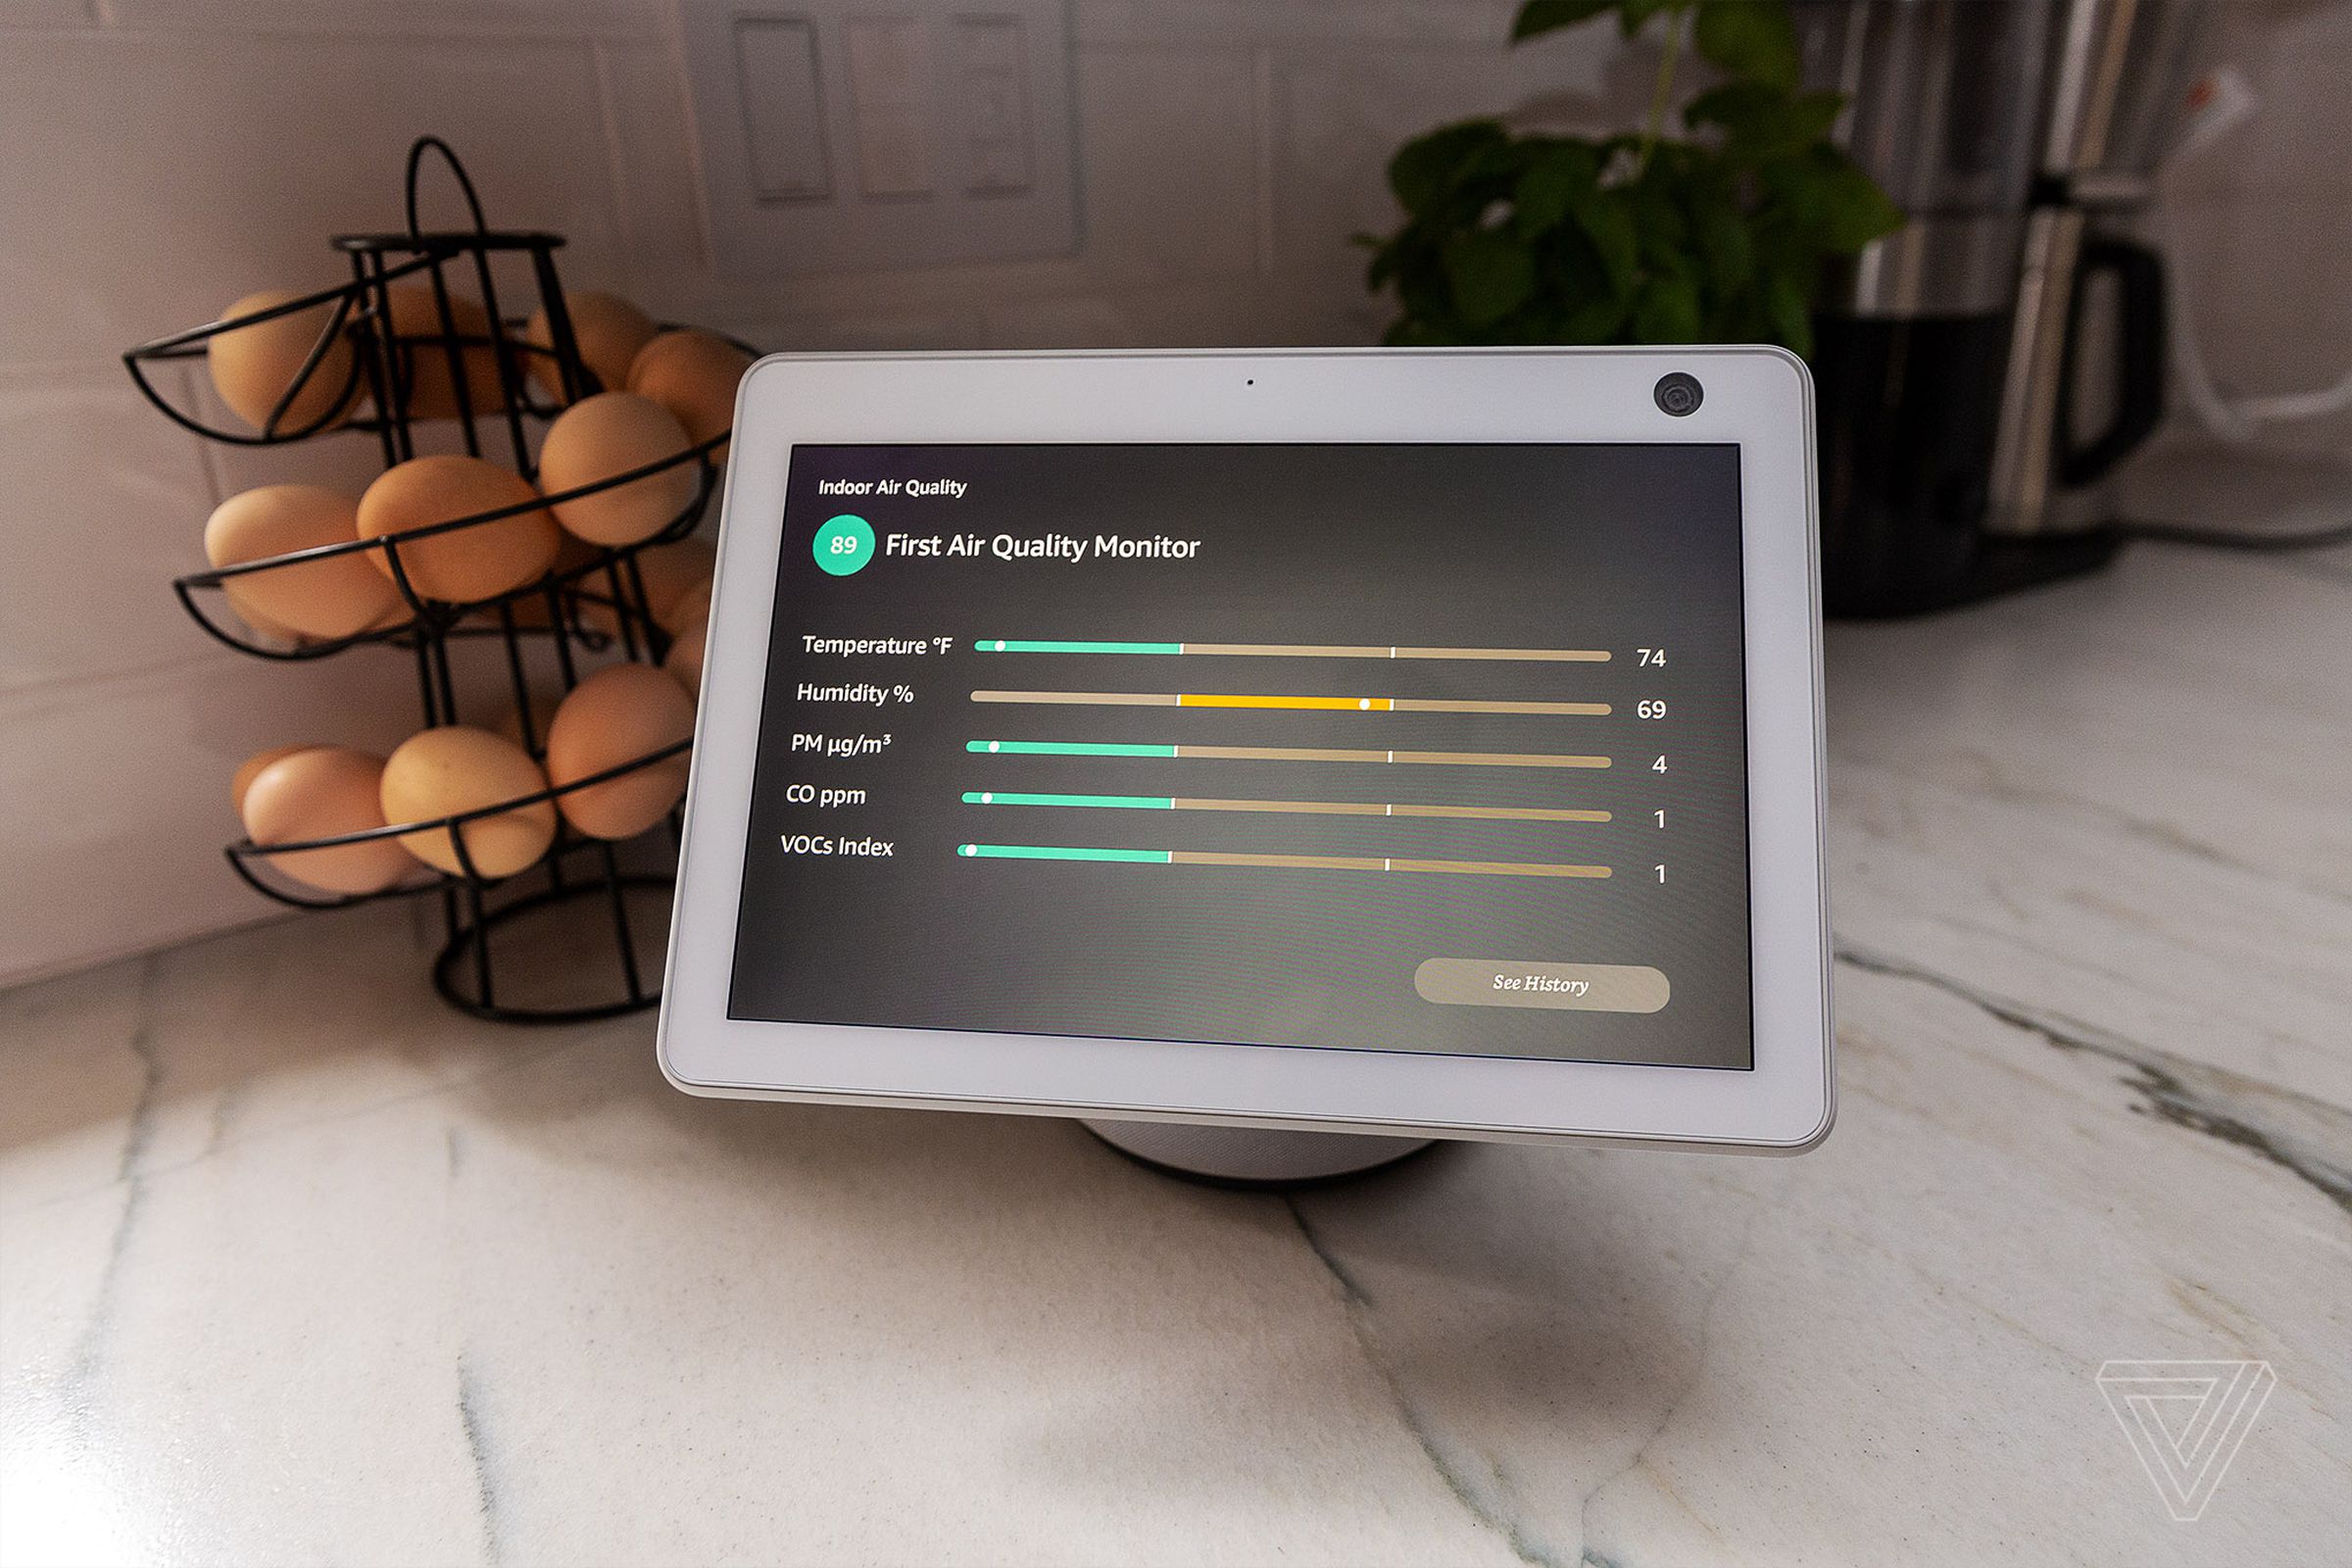 You can see your air quality score dashboard on an Echo Show smart display, as well as in the Alexa app on a smartphone.